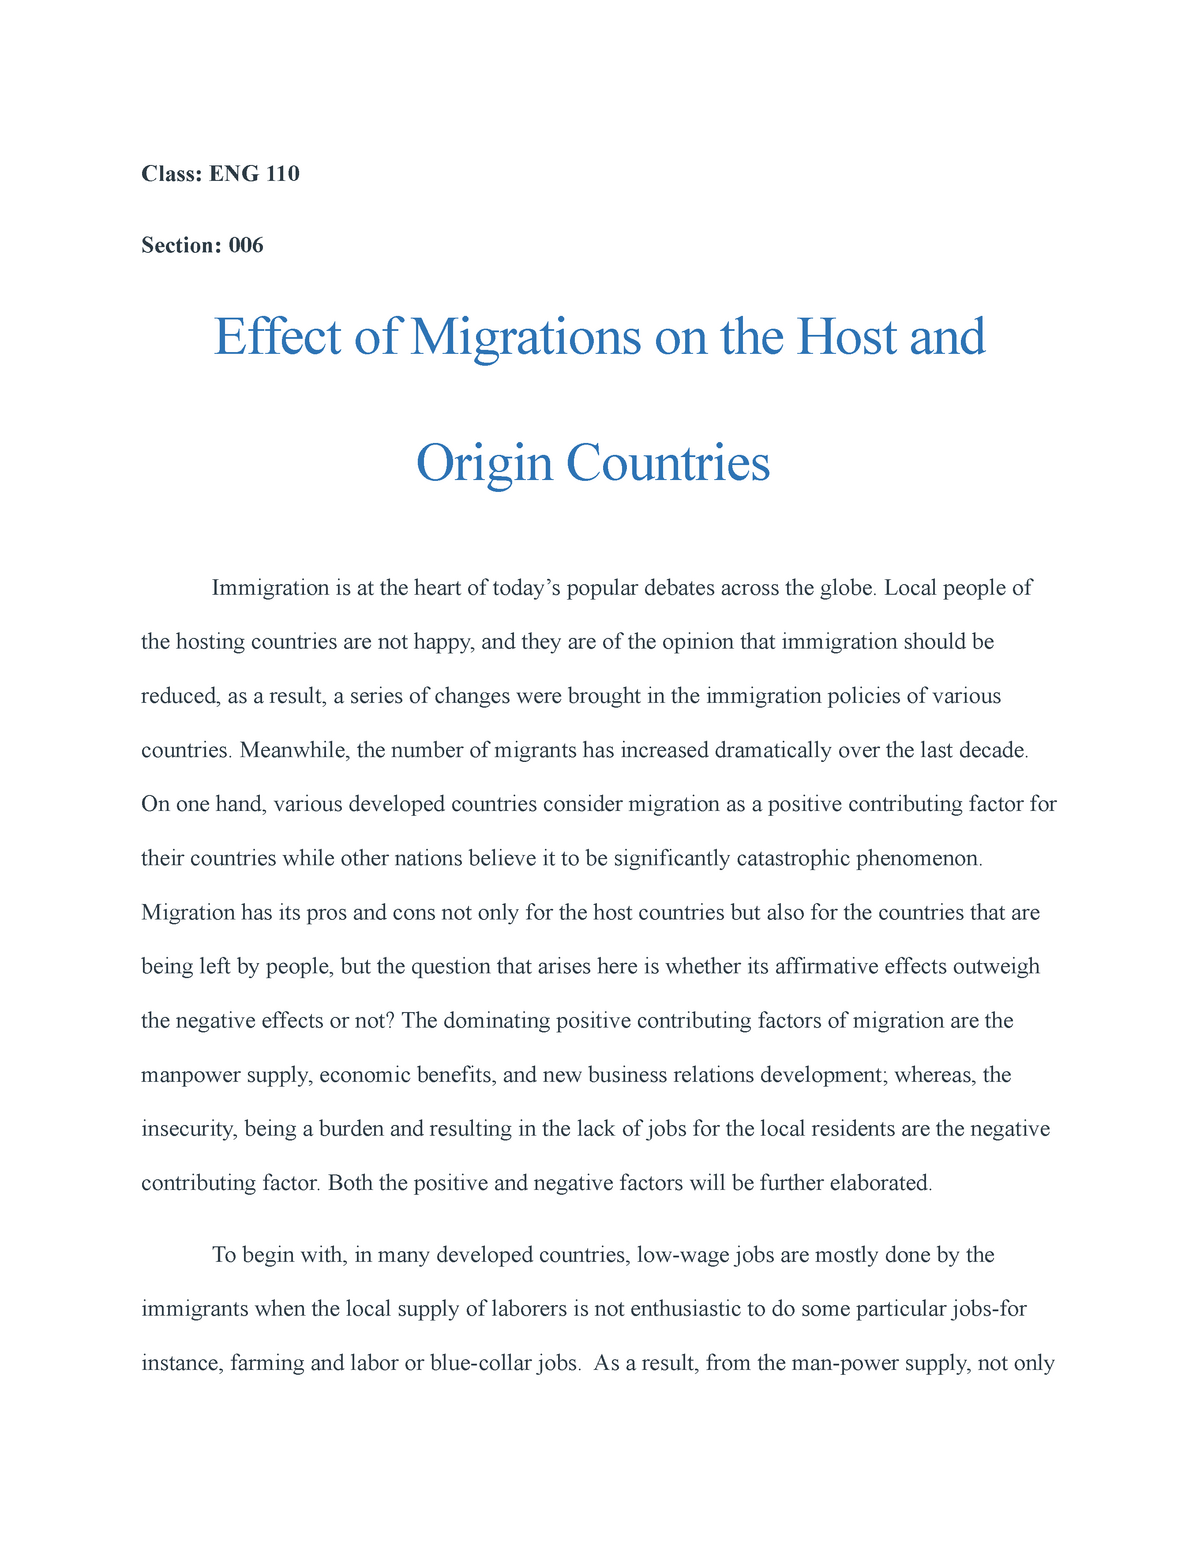 cause and effect of migration essay